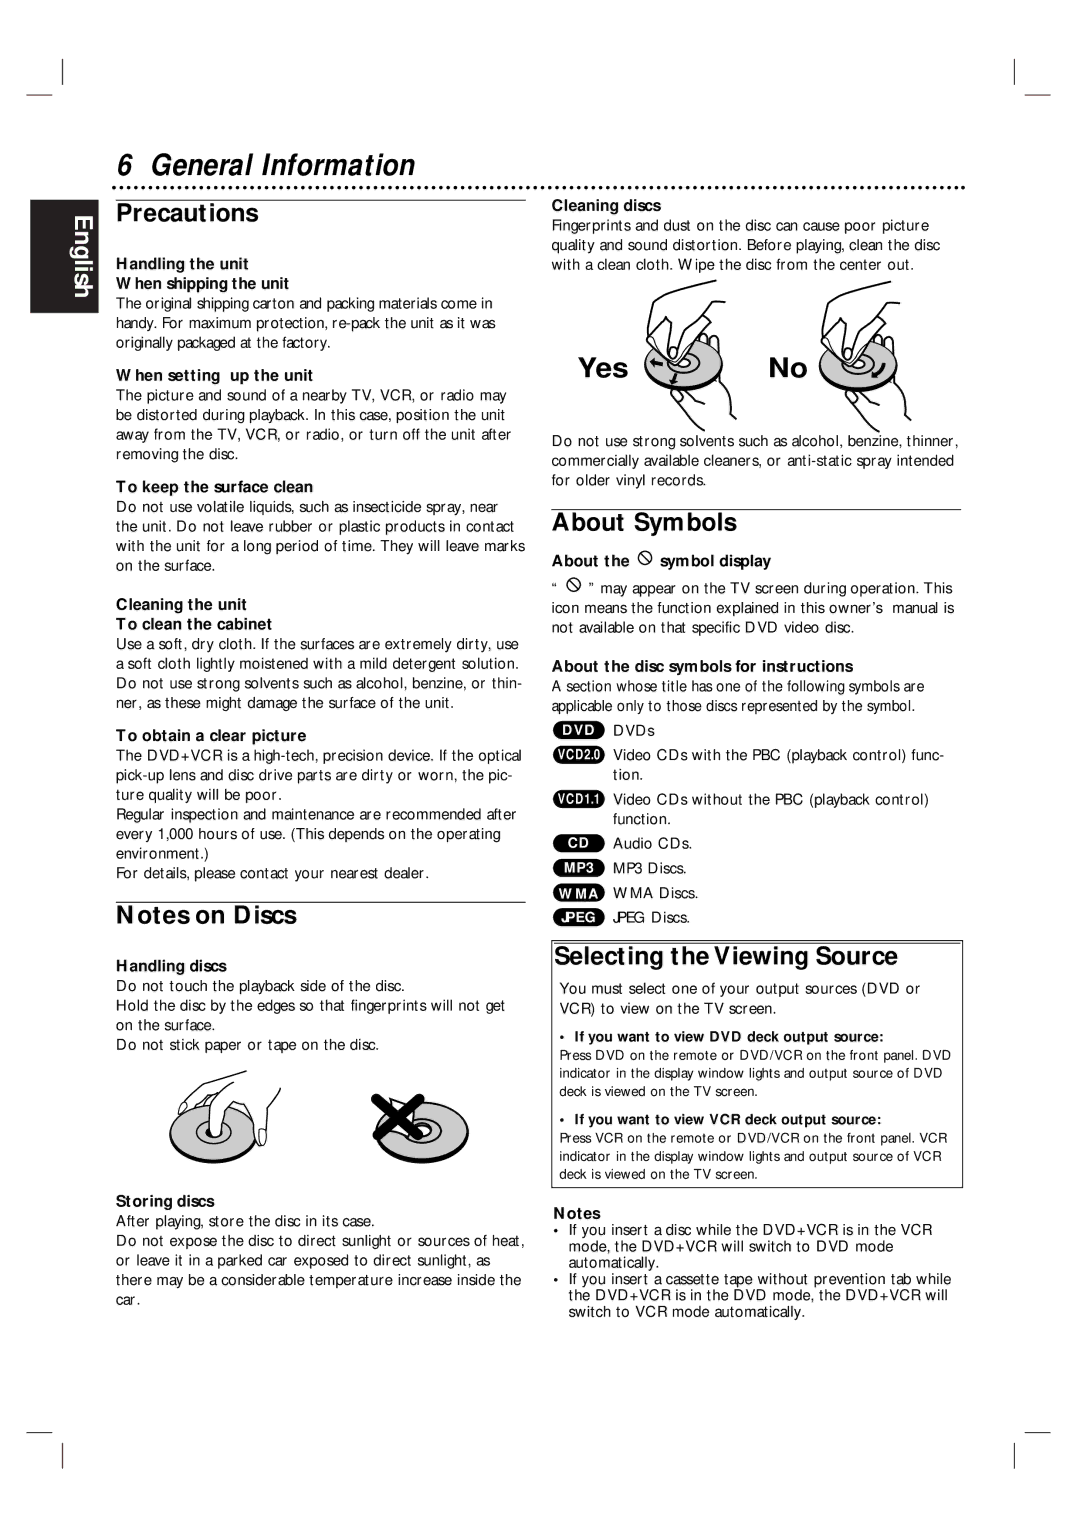 Magnavox MDV560VR/17 warranty Precautions, About Symbols, Selecting the Viewing Source 